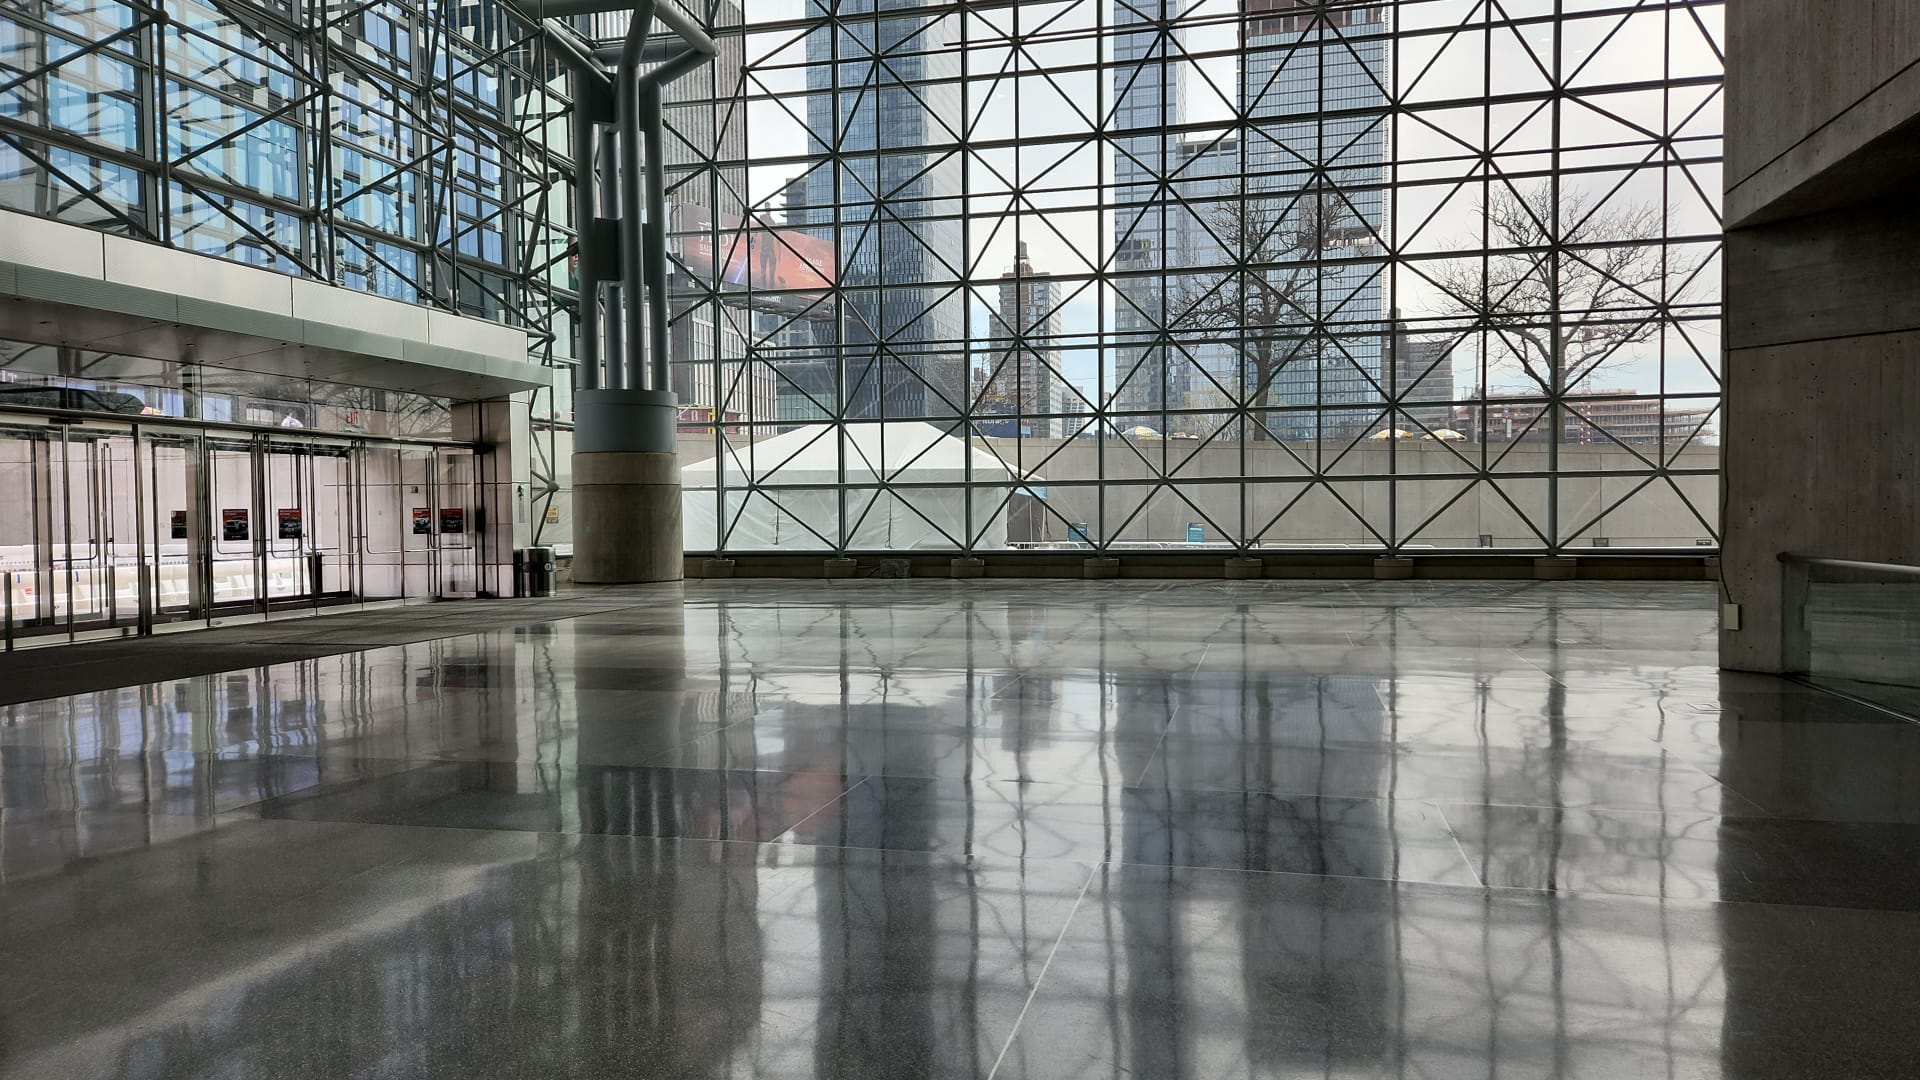 Jacob K. Javits Convention Center in New York City